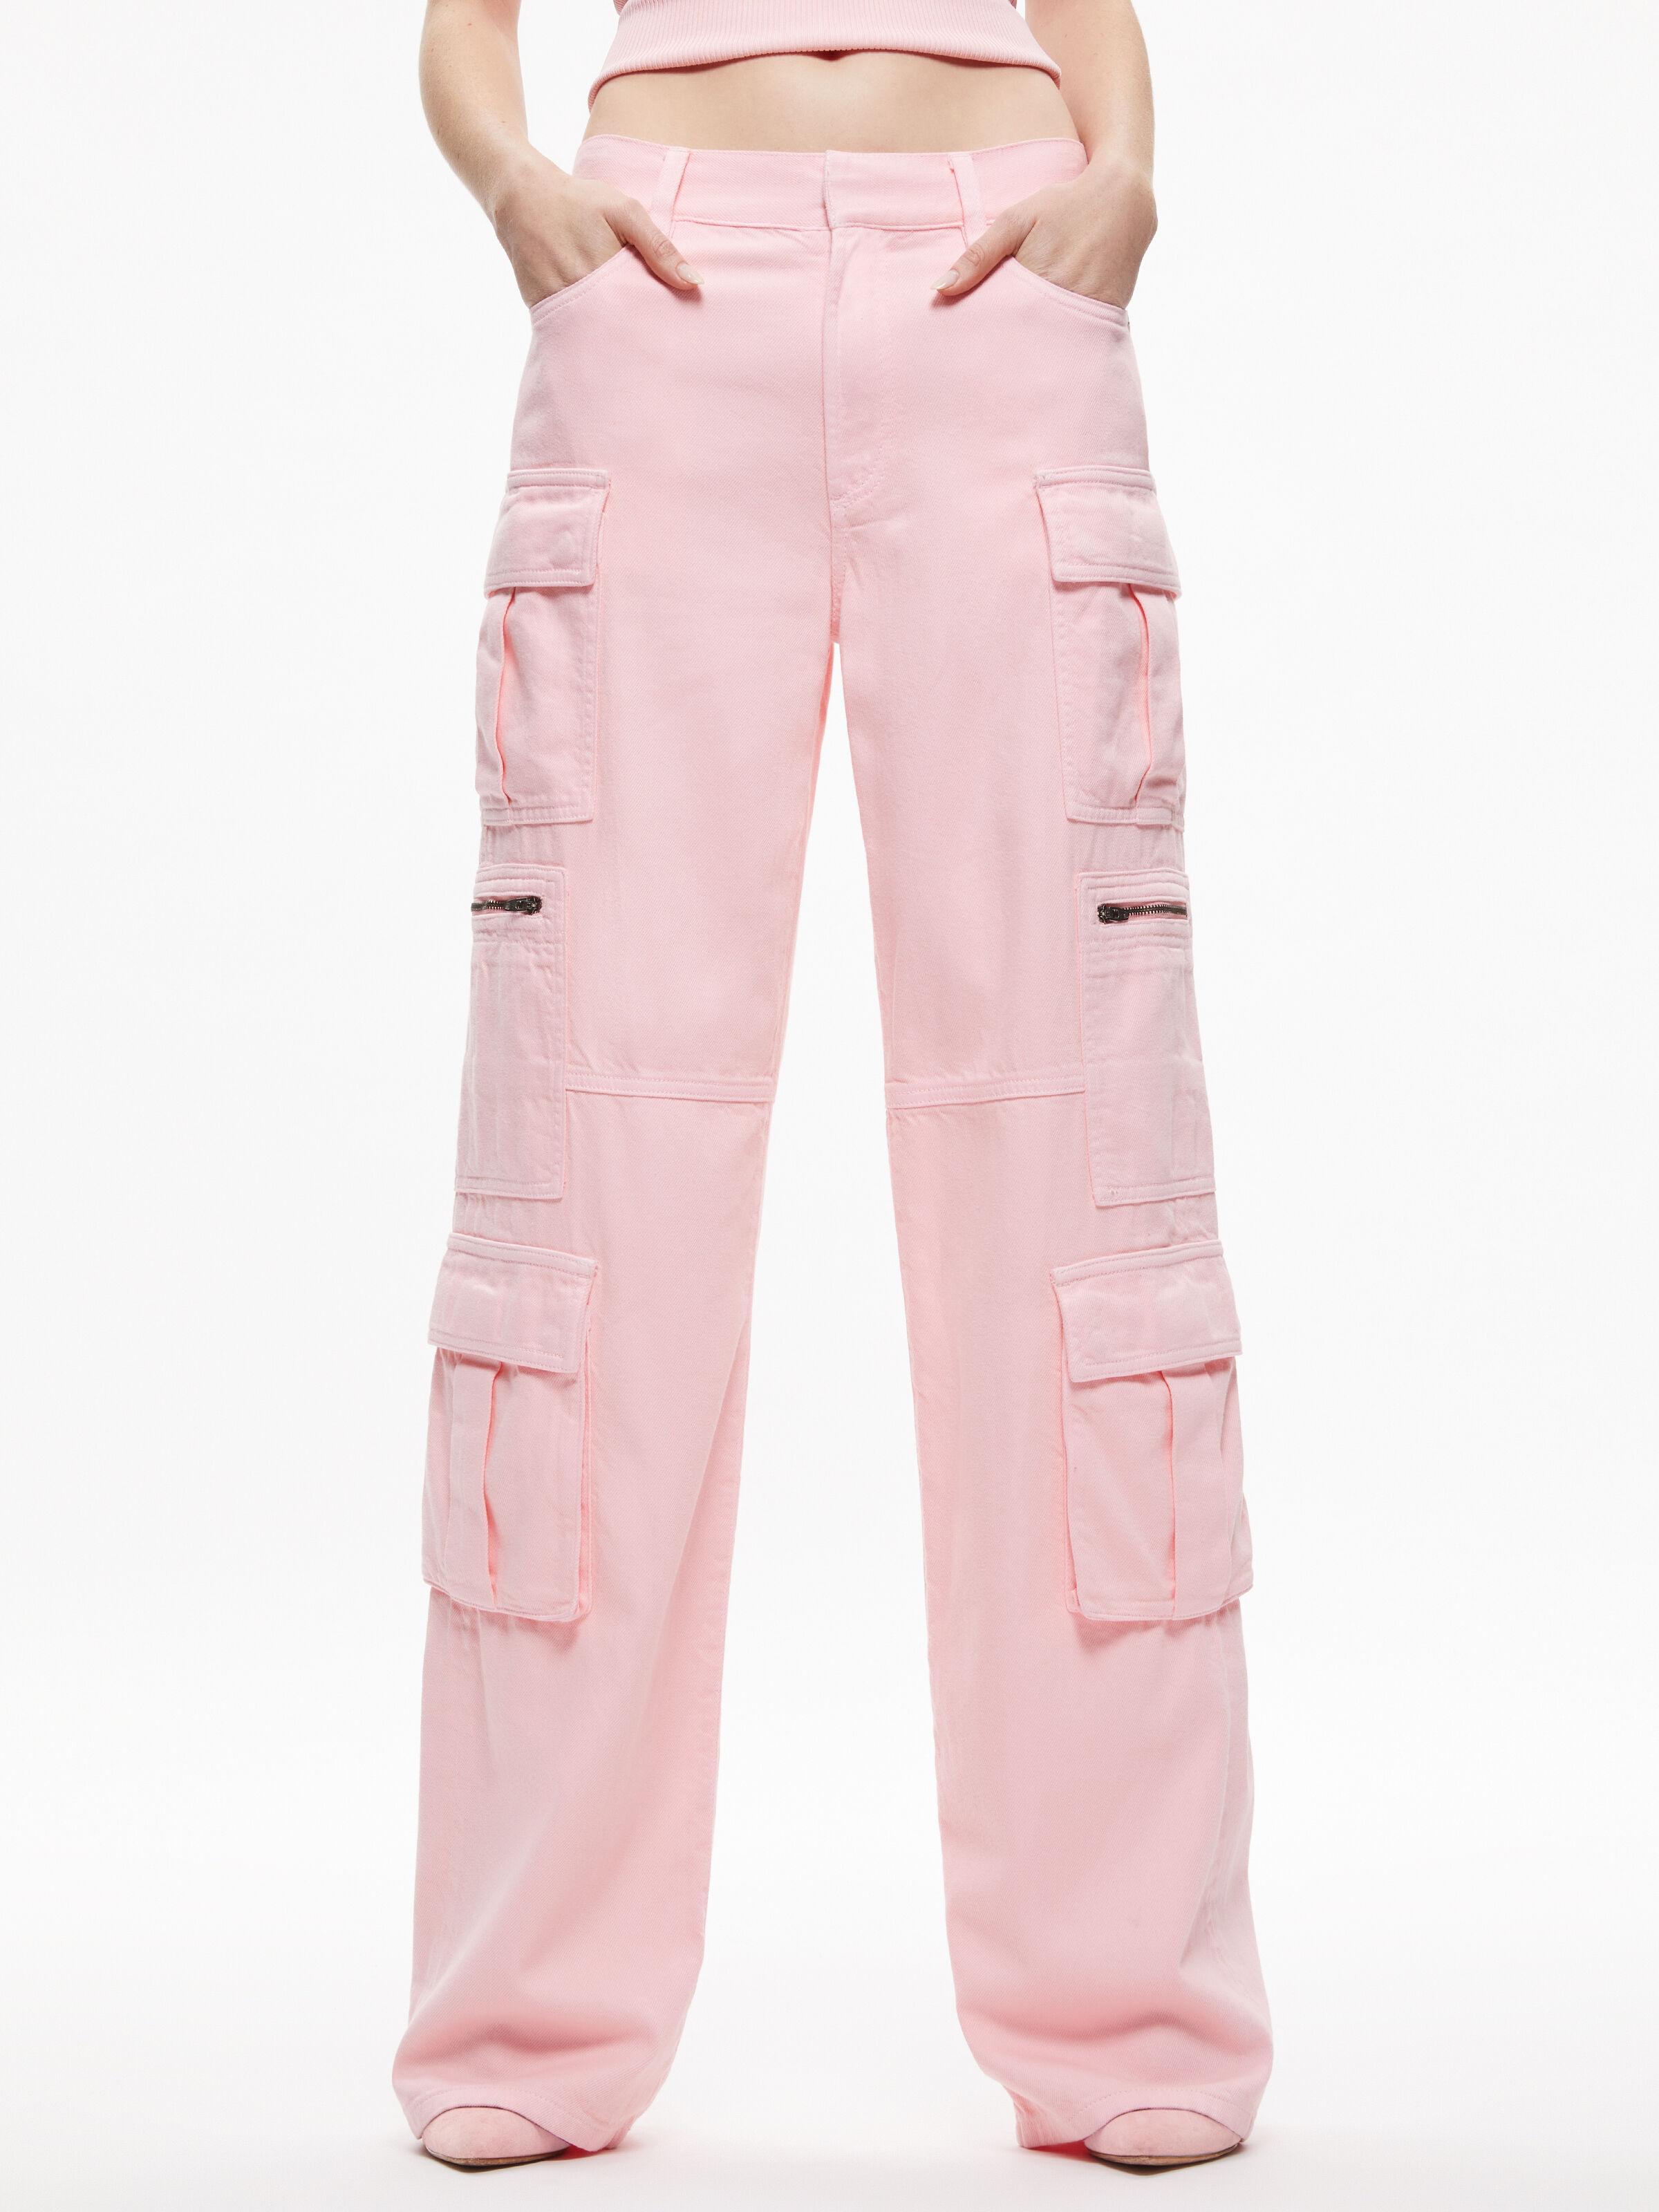 Alice + Olivia Cay BAGGY Cargo Jeans in Pink | Lyst